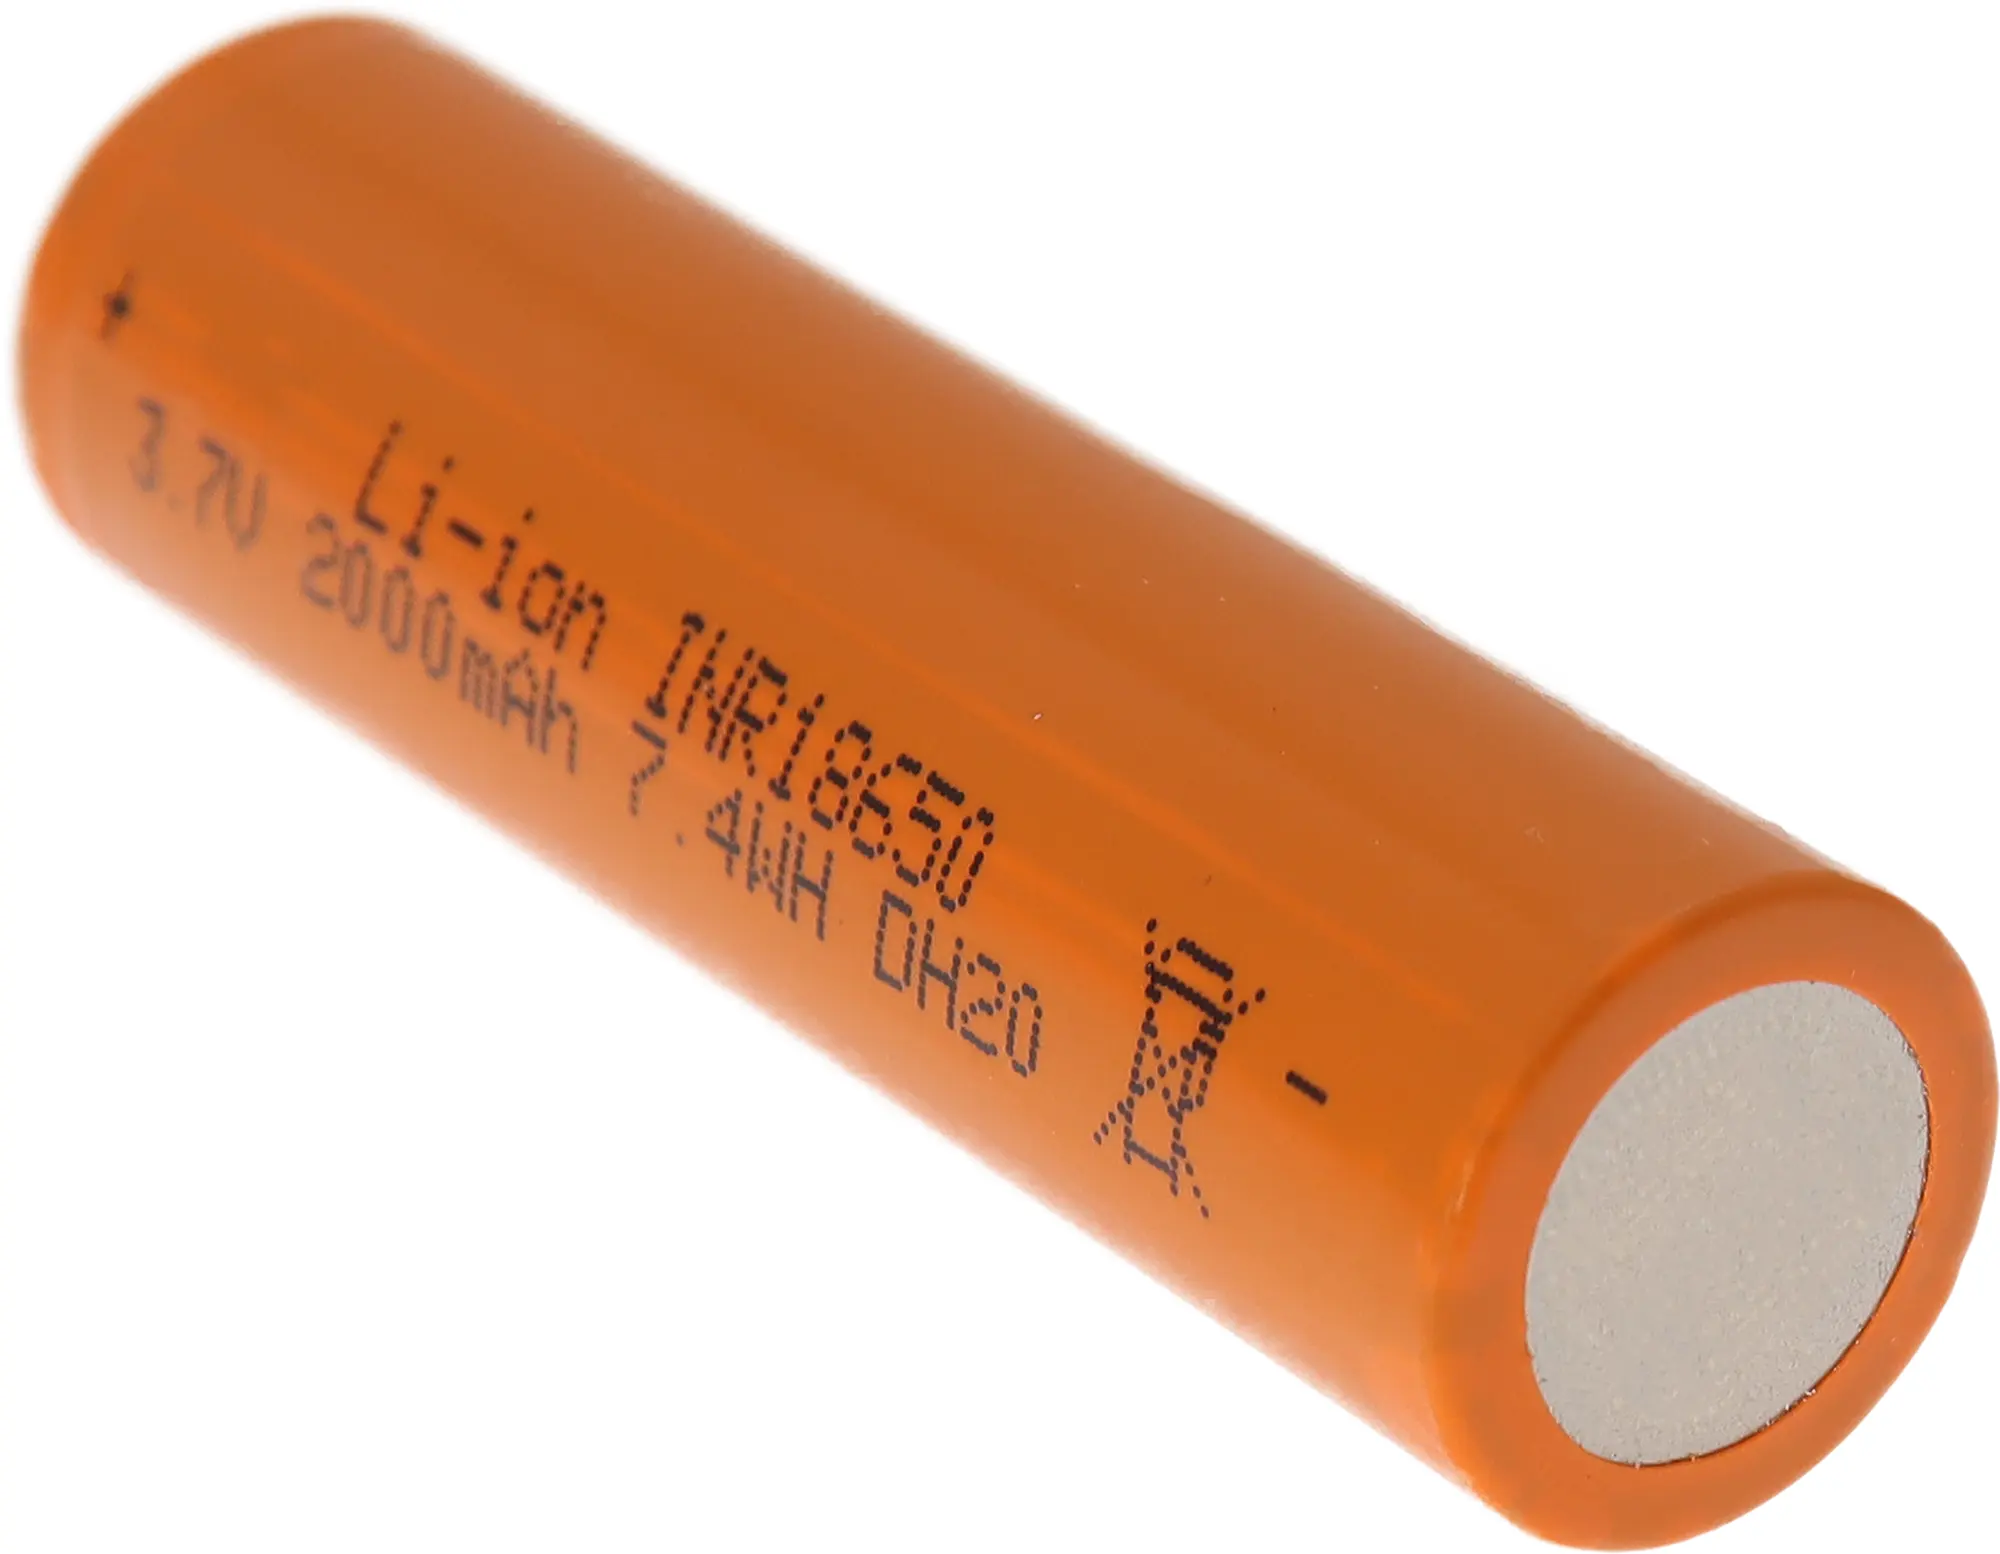 Super Li Ion Battery Cell 3.7v 2000mah Lithium Ion 18650 Rechargeable Battery